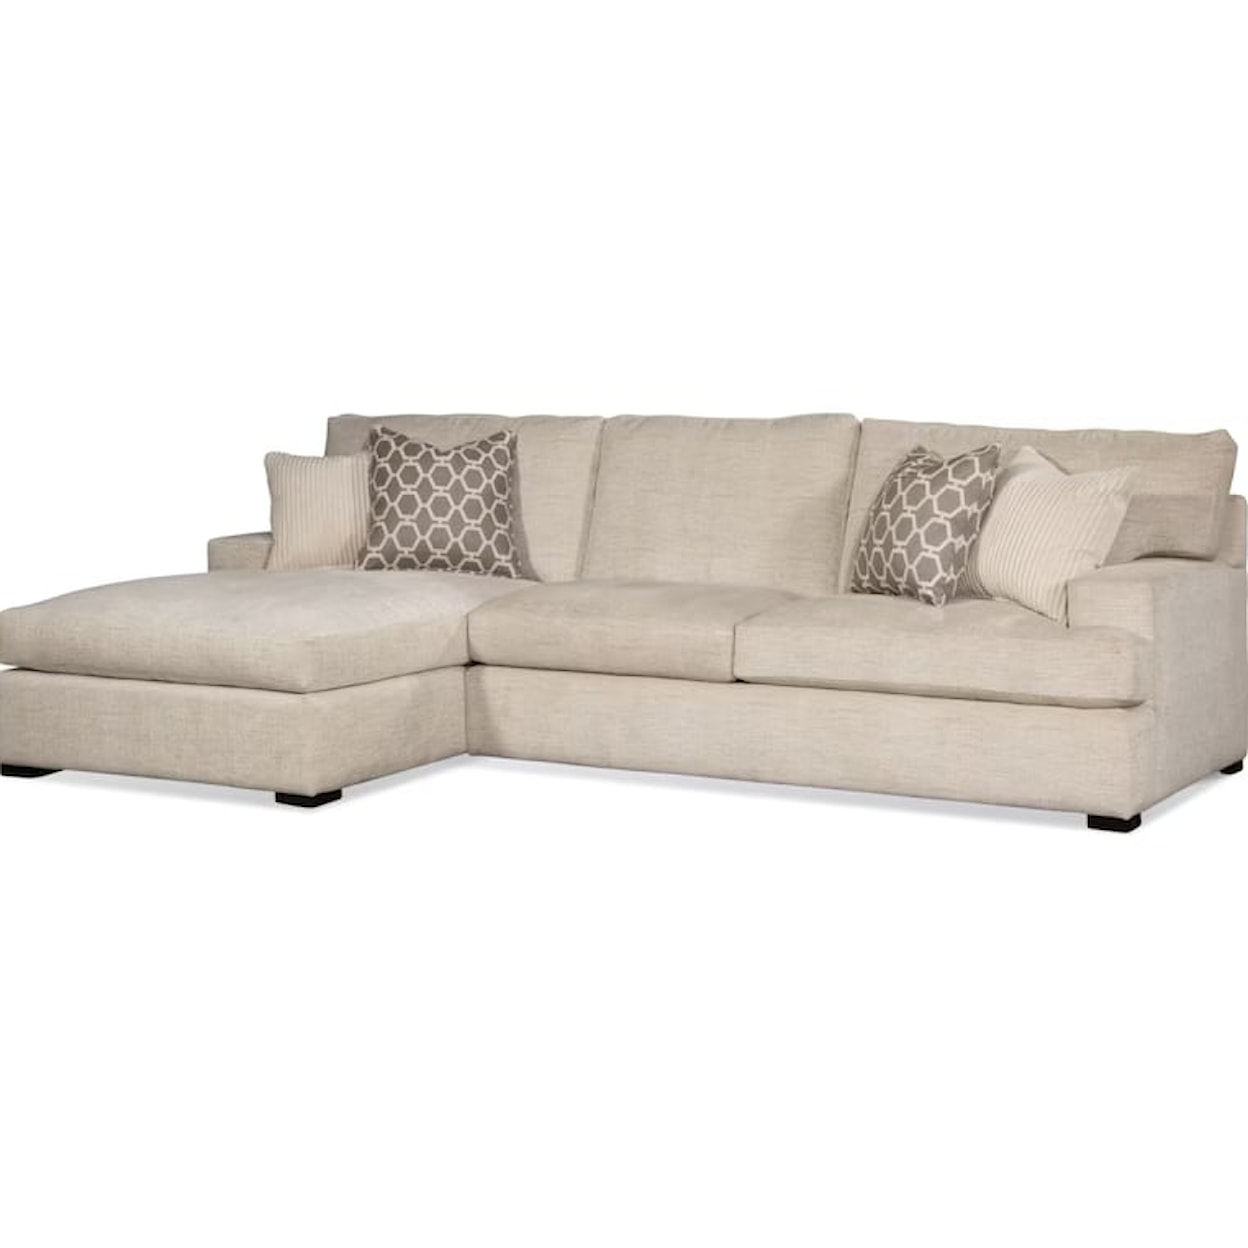 Braxton Culler Cambria 2-Piece Chaise Sectional